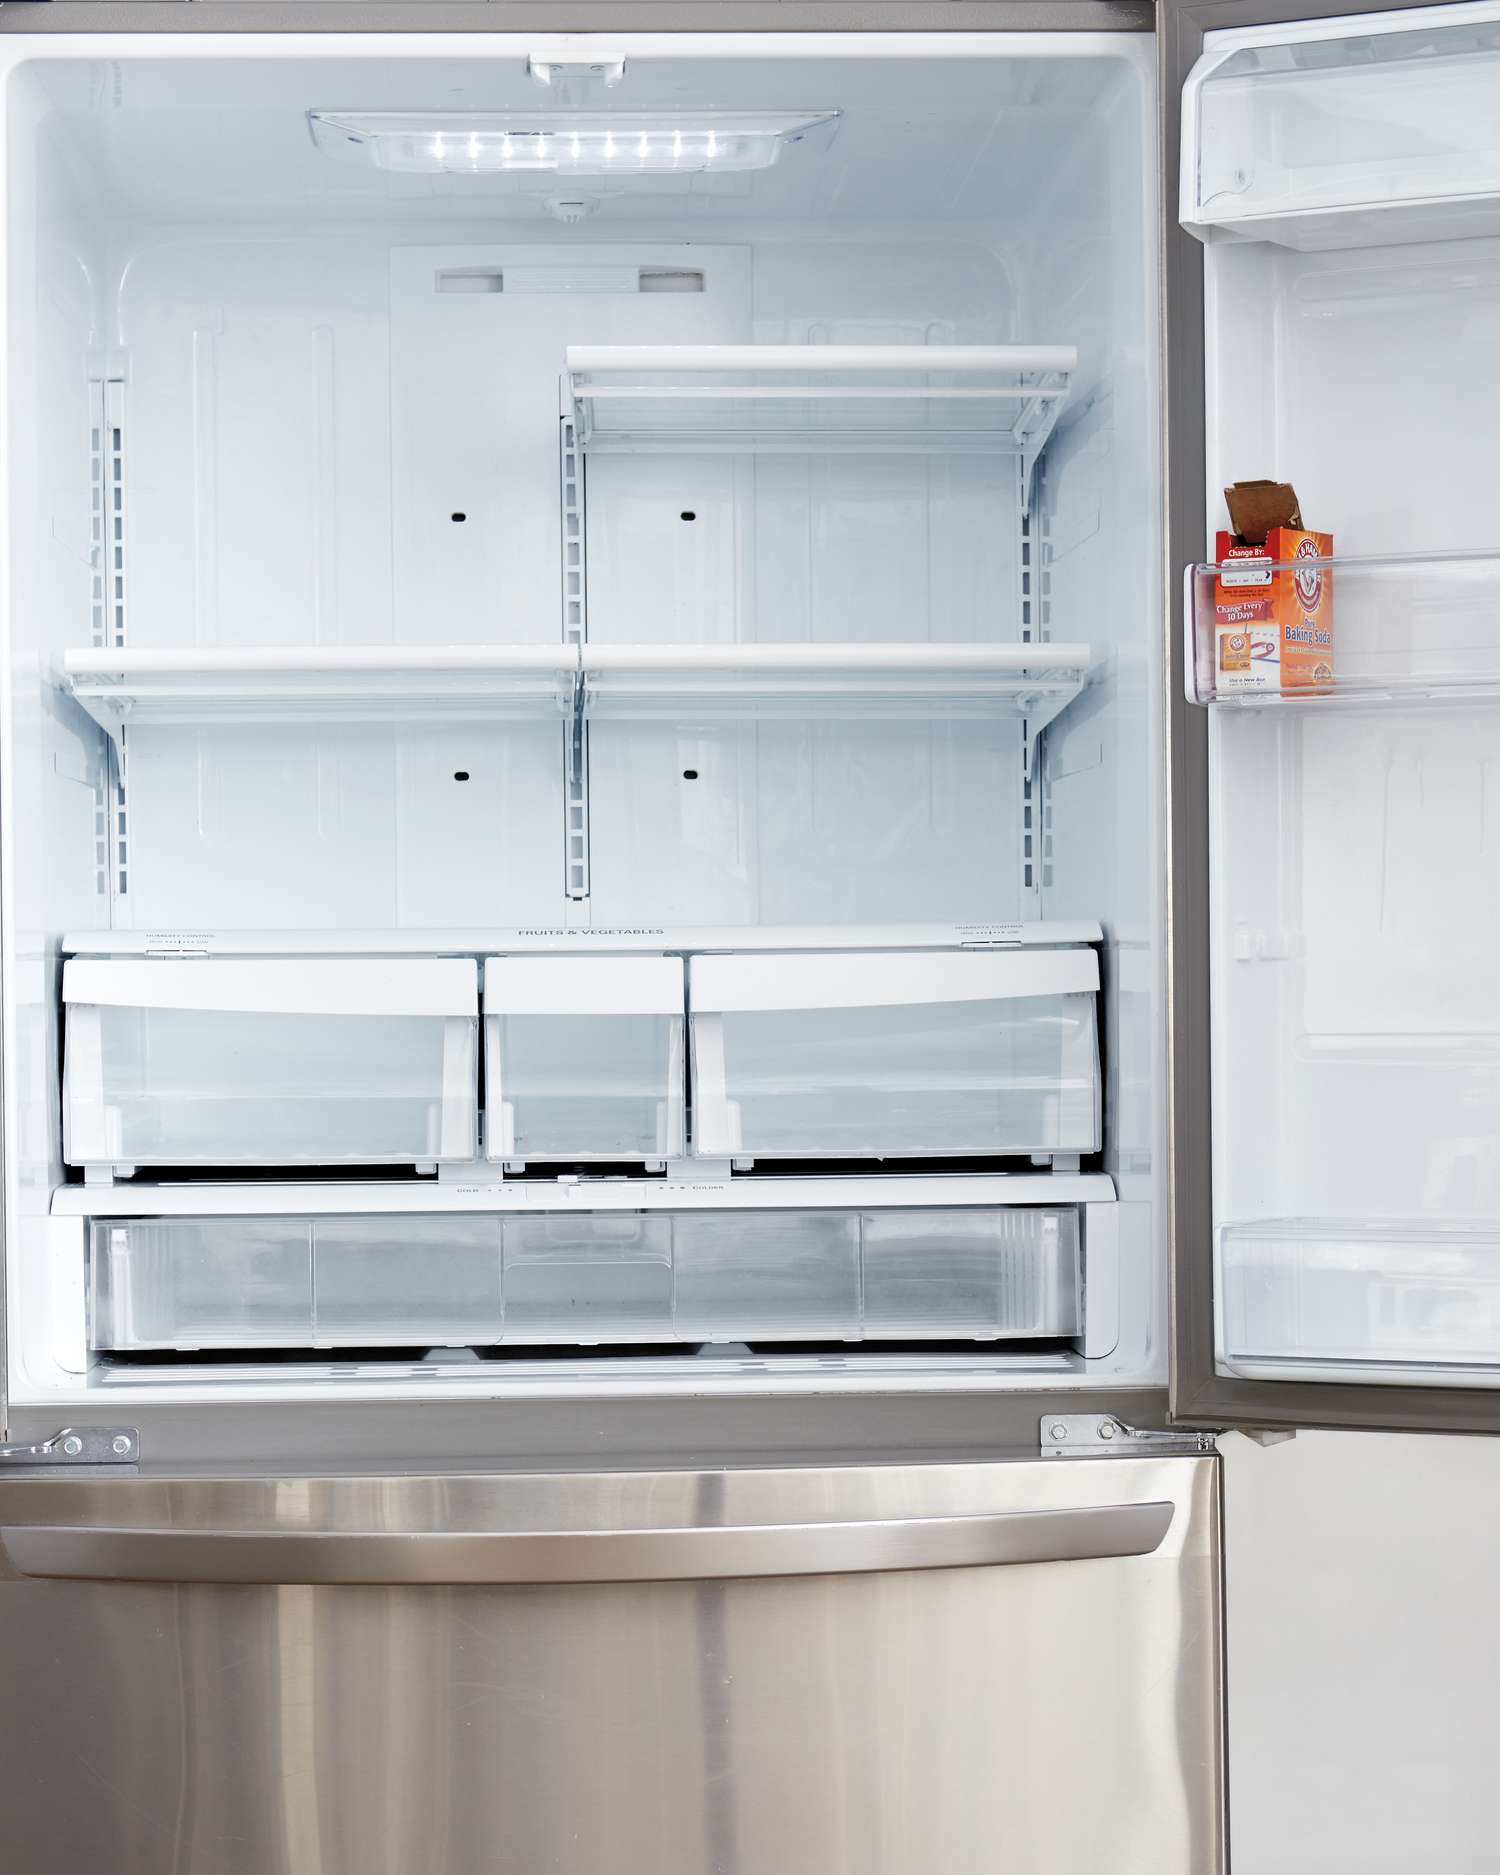 How to clean the outside of a stainless steel fridge Refrigerator Deep Cleaning 101 Martha Stewart